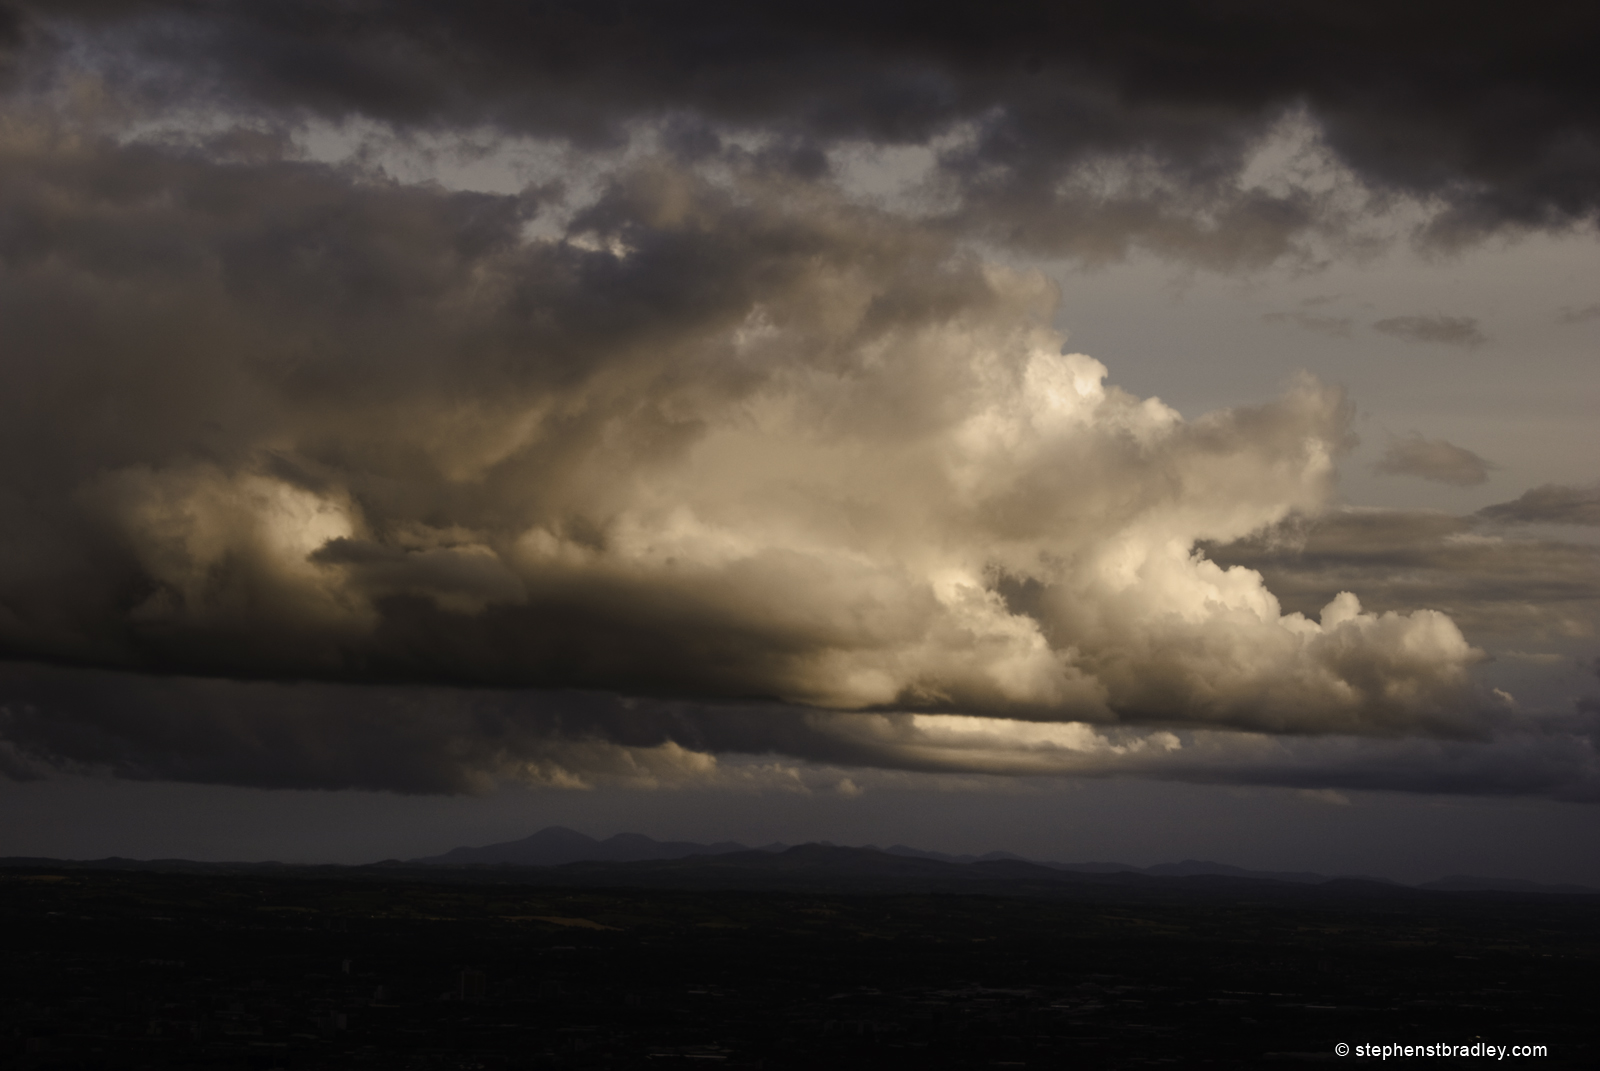 Evening clouds over the Mourne Mountains, from the Cavehill, Northern Ireland.